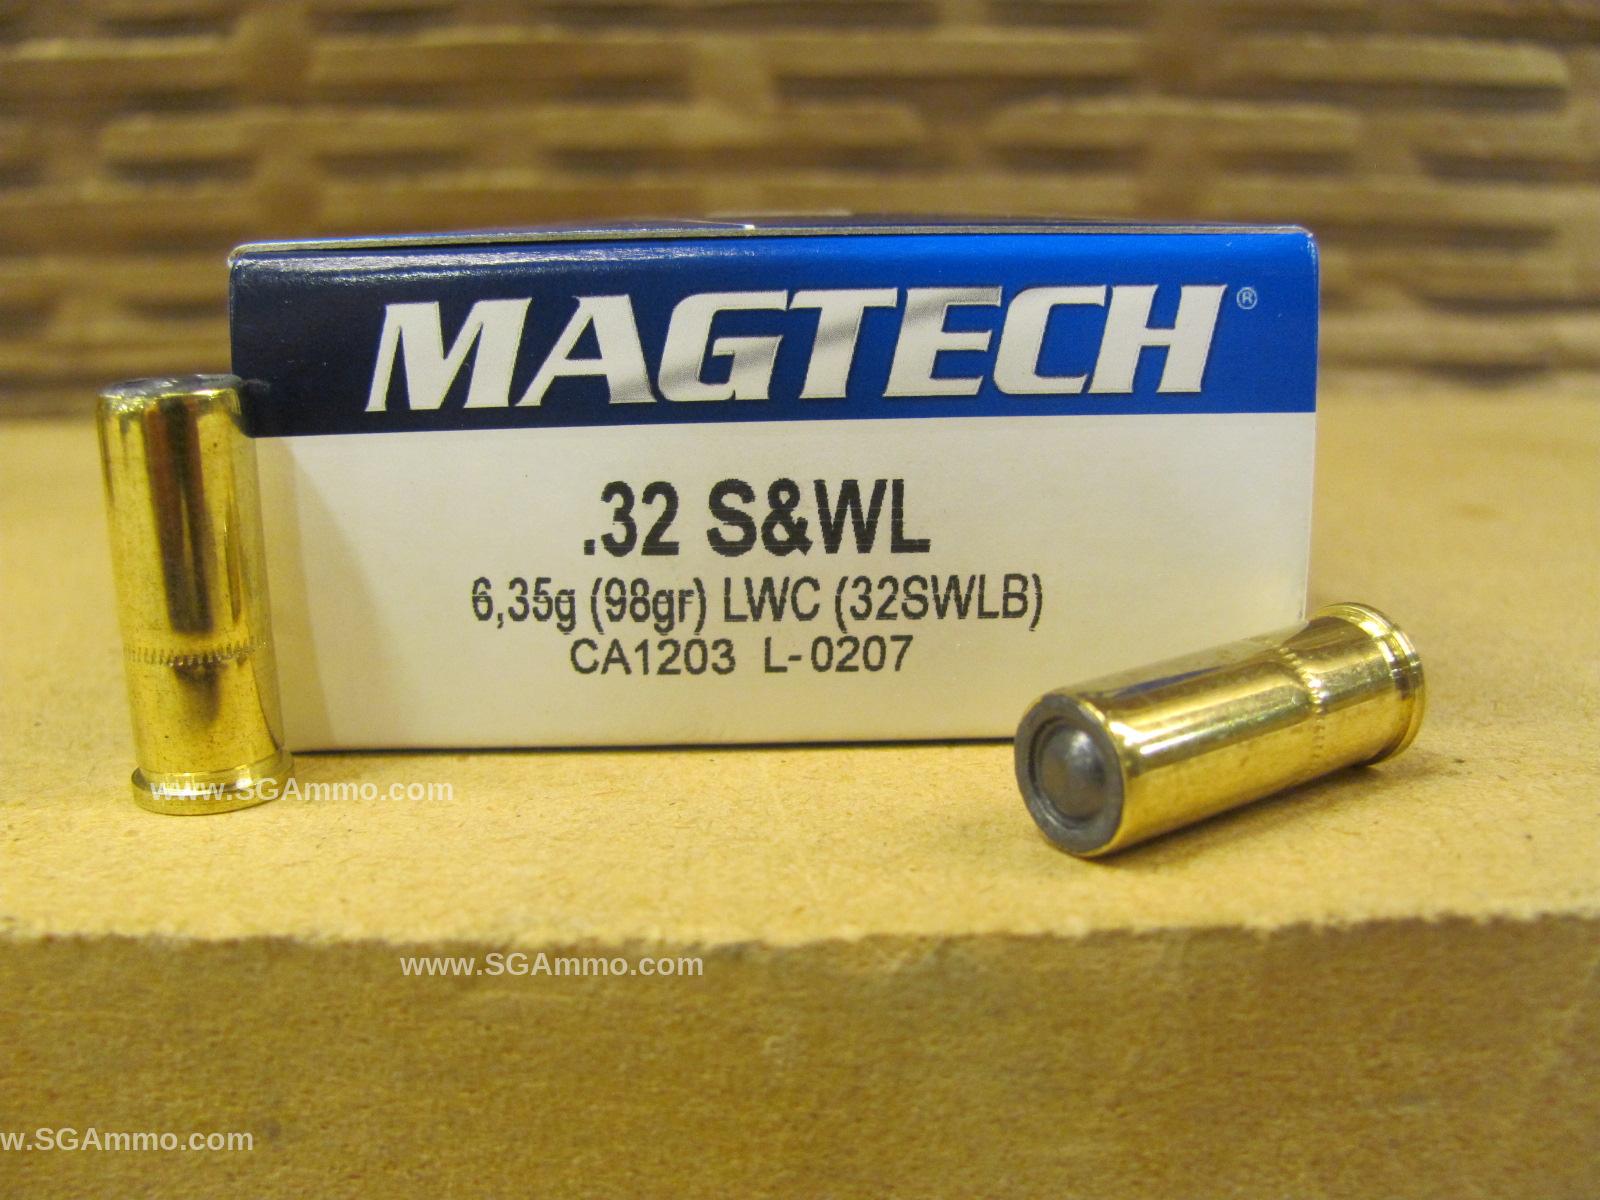 50 Round Box - 32 SW Long LWC Lead Bullet Magtech Ammo - 32SWLB